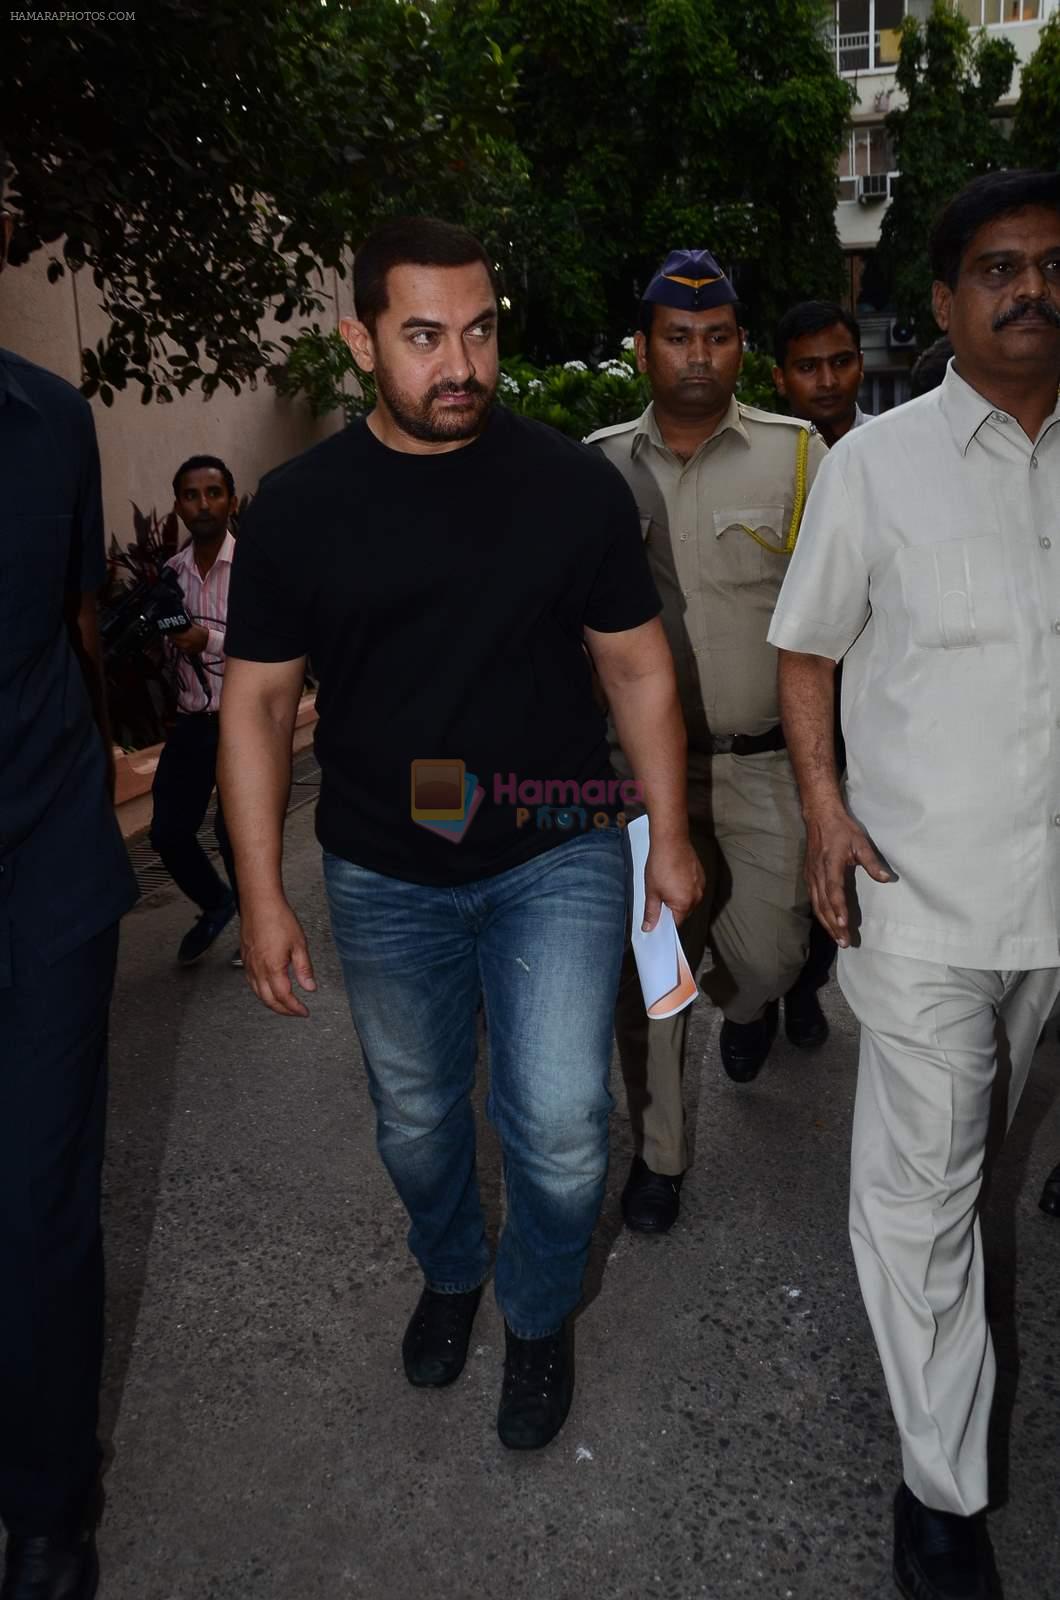 Aamir Khan at Swachata Diwas Event on 29th May 2015